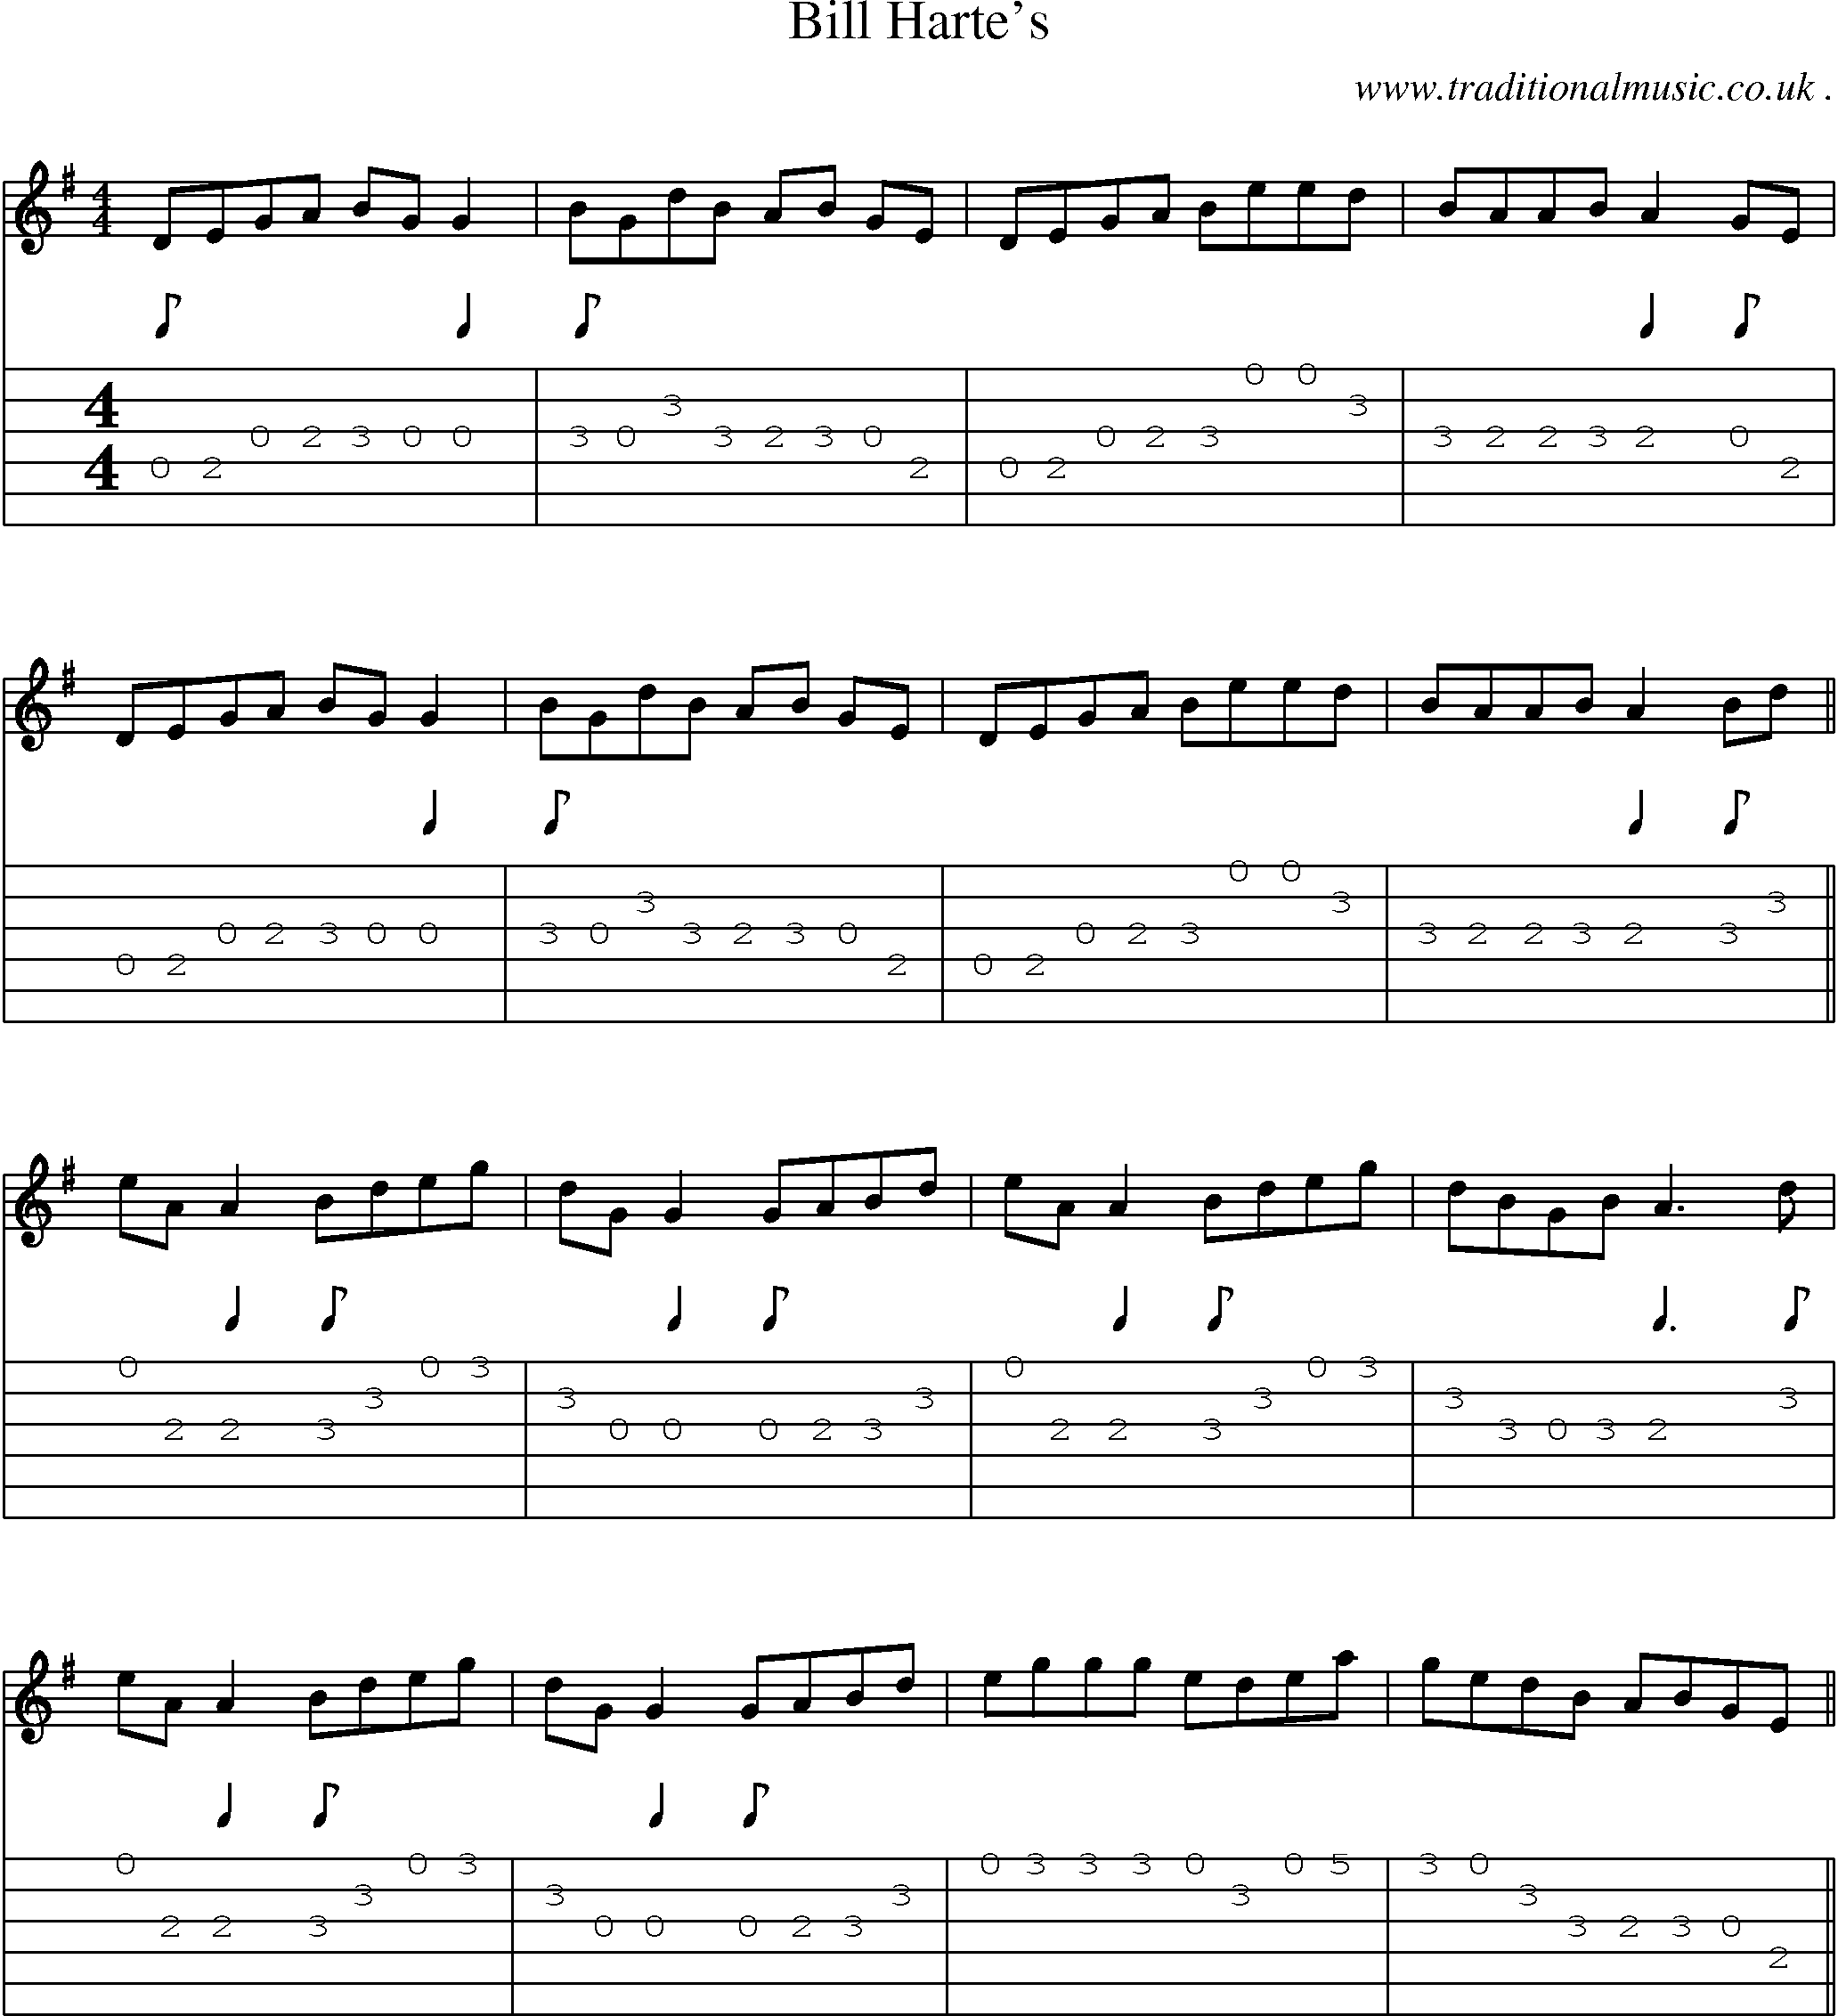 Sheet-Music and Guitar Tabs for Bill Hartes